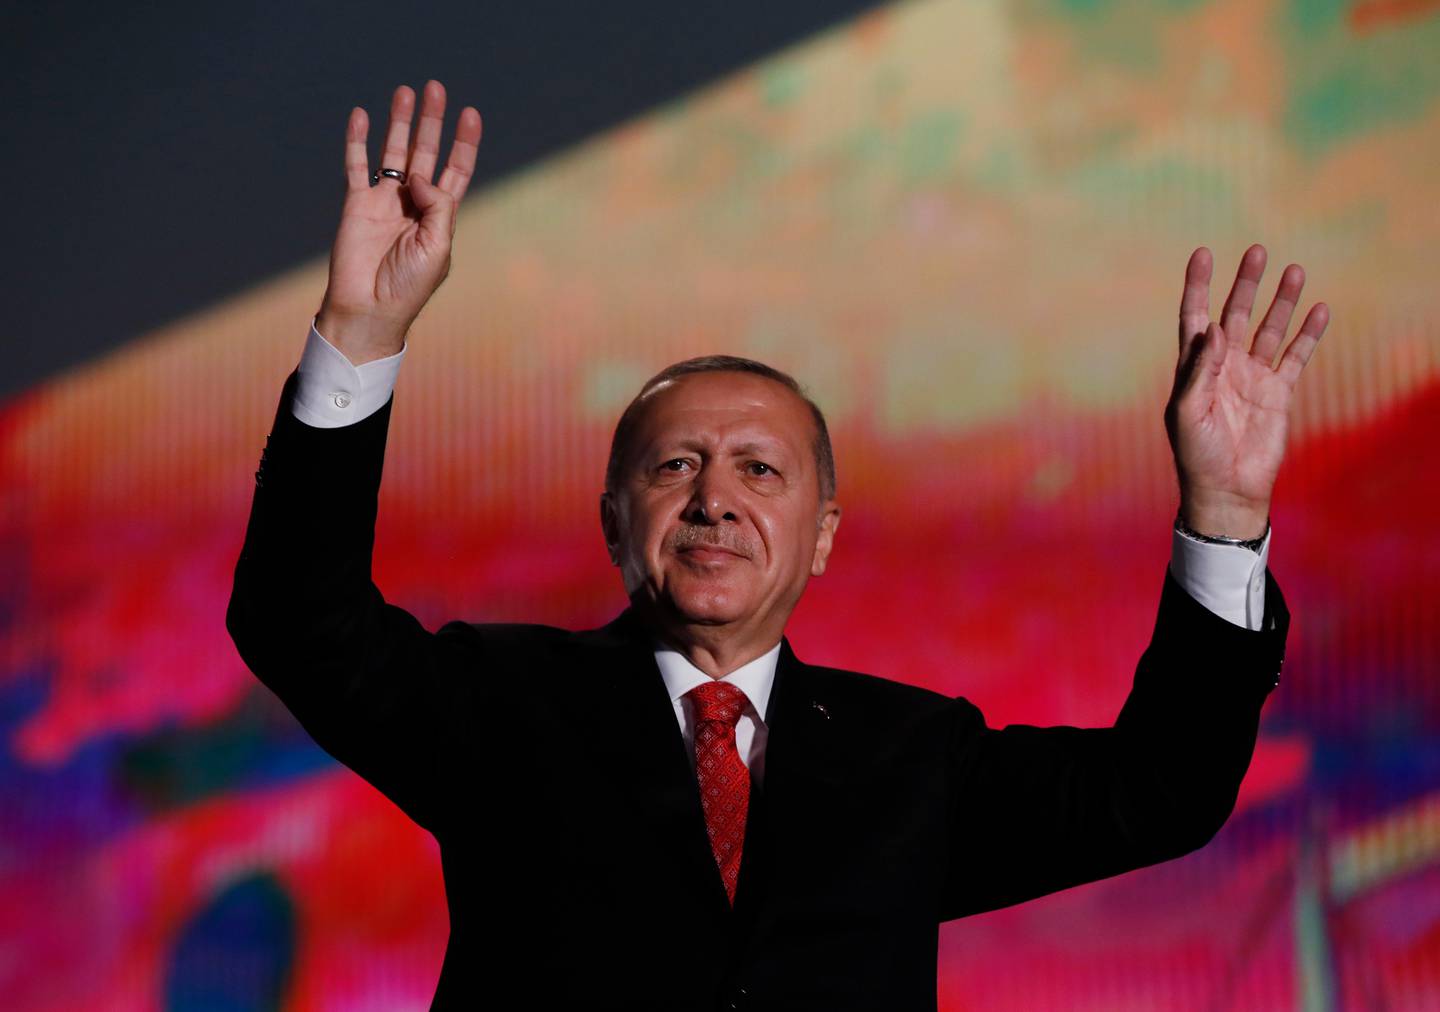 Turkey's President Recep Tayyip Erdogan waves to supporters following a rally to honour the victims of the July 15, 2016 failed coup attempt, part of the ceremonies marking the three-year anniversary, in Istanbul, Monday, July 15, 2019. Turkey is marking the third anniversary of the July 15 failed coup attempt against the government, with prayers and other events remembering its victims. (AP Photo/Lefteris Pitarakis)